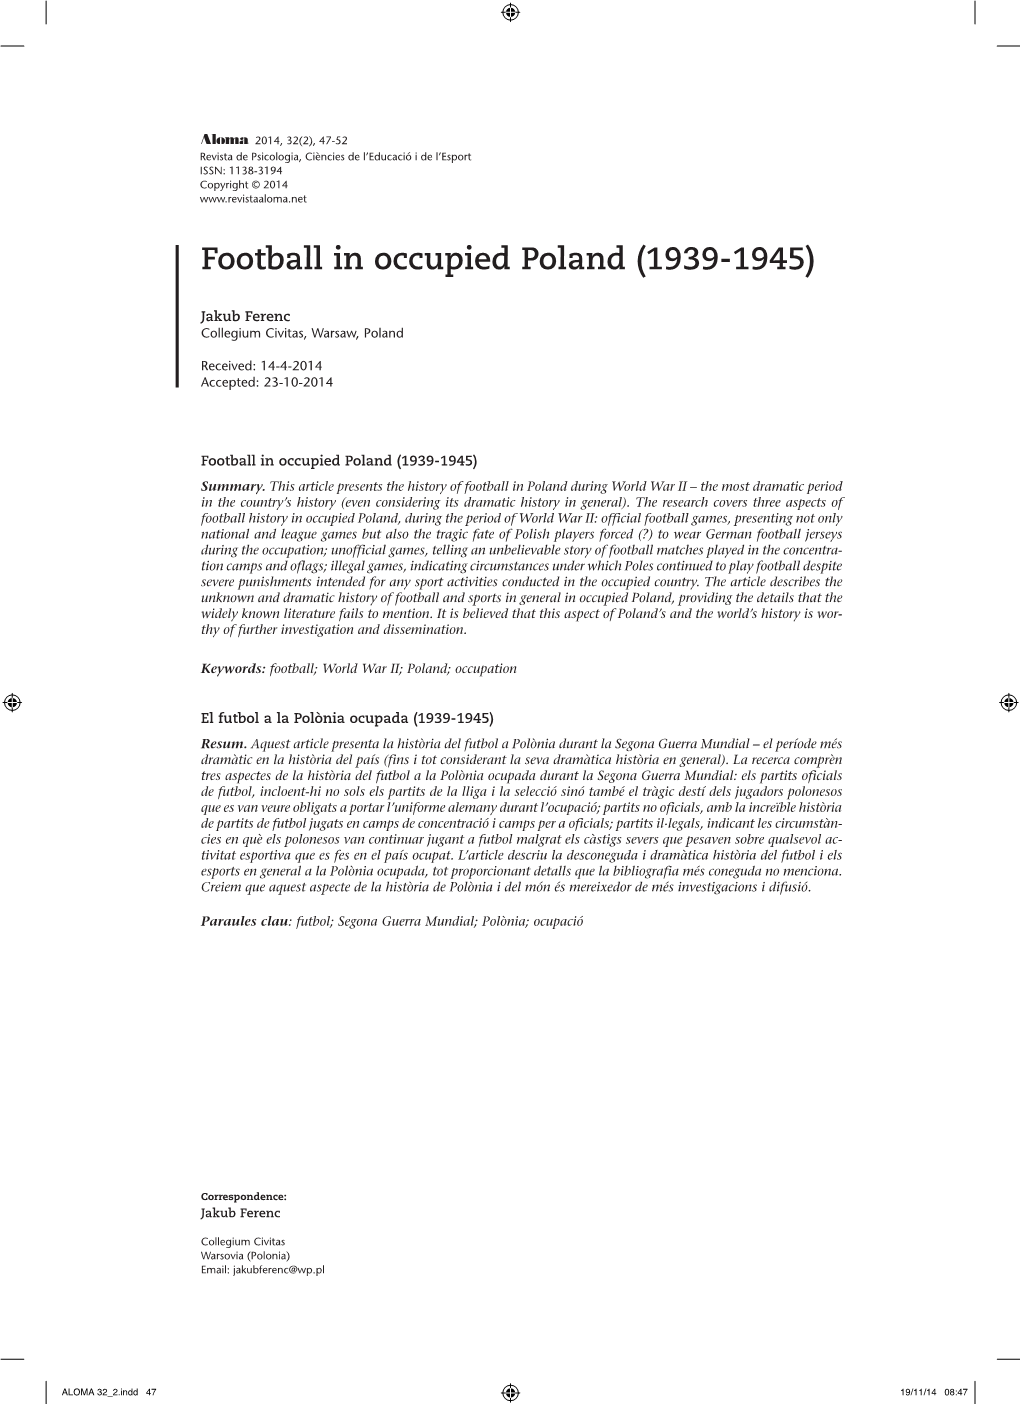 Football in Occupied Poland (1939-1945)